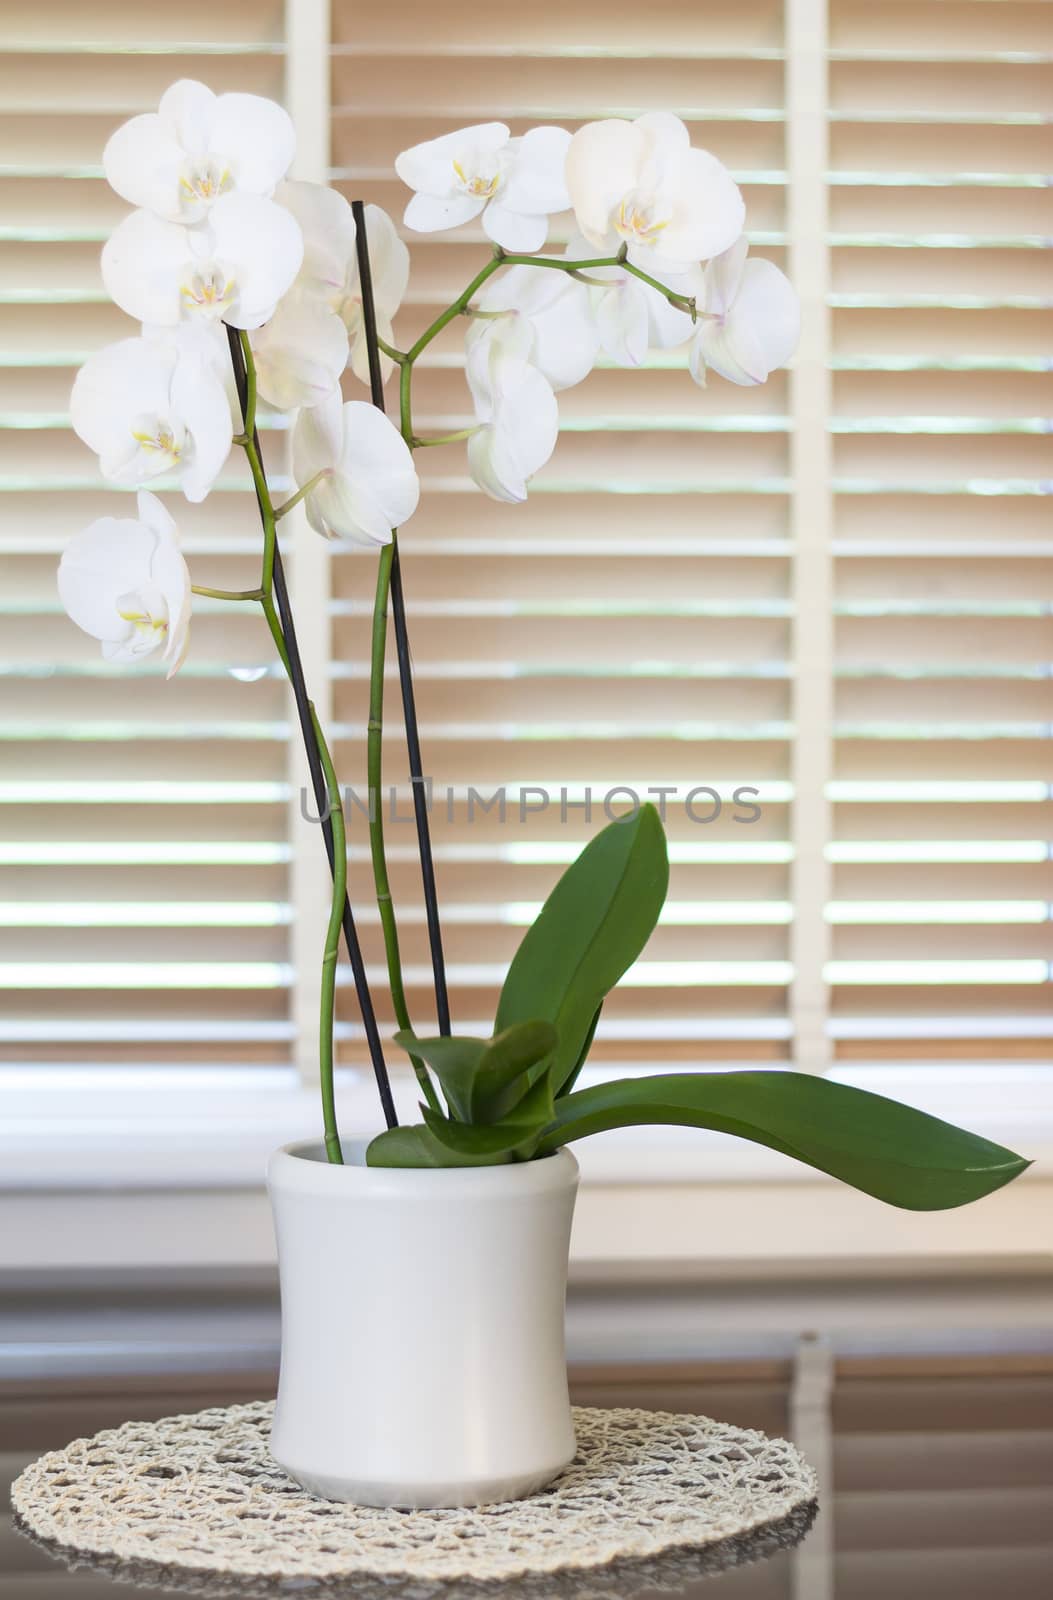 a orchid plant with plenty white flowers in top a gray mirror tabel in a circular support in front of a blurred window with brown wooden blinders slightly open forming light green stripes.